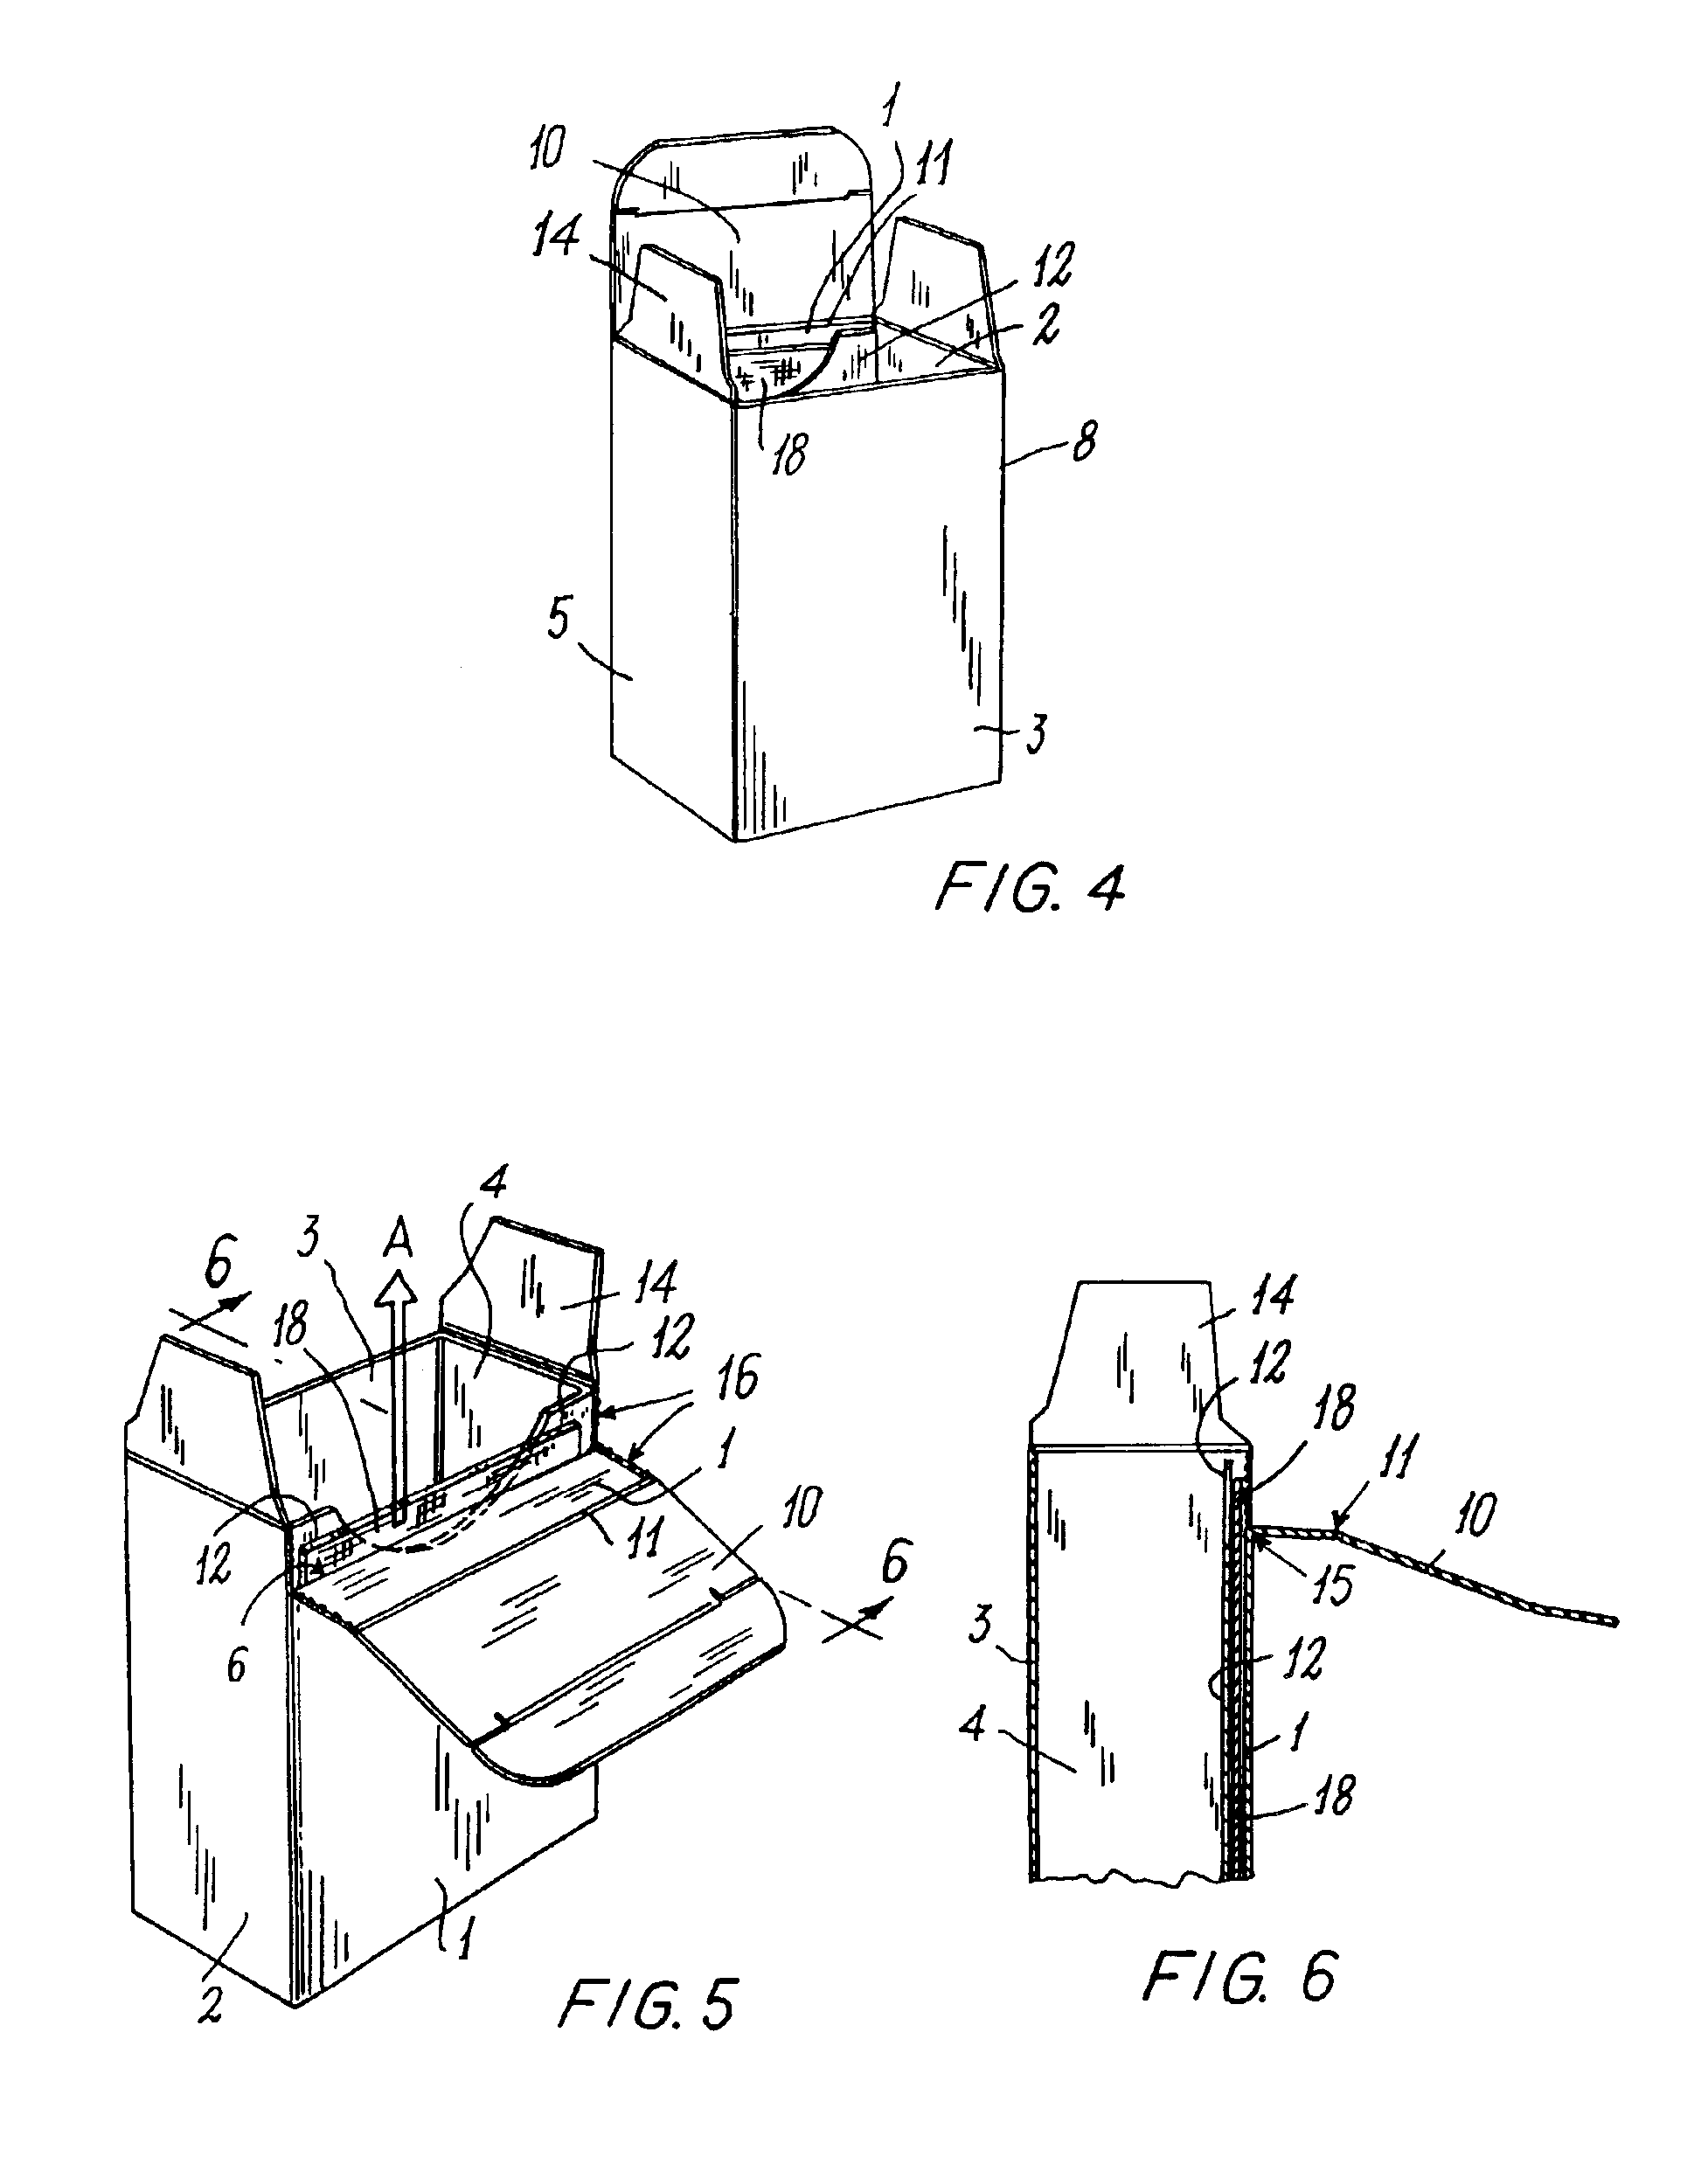 Box with folding panel for extracting an illustrative leaftlet